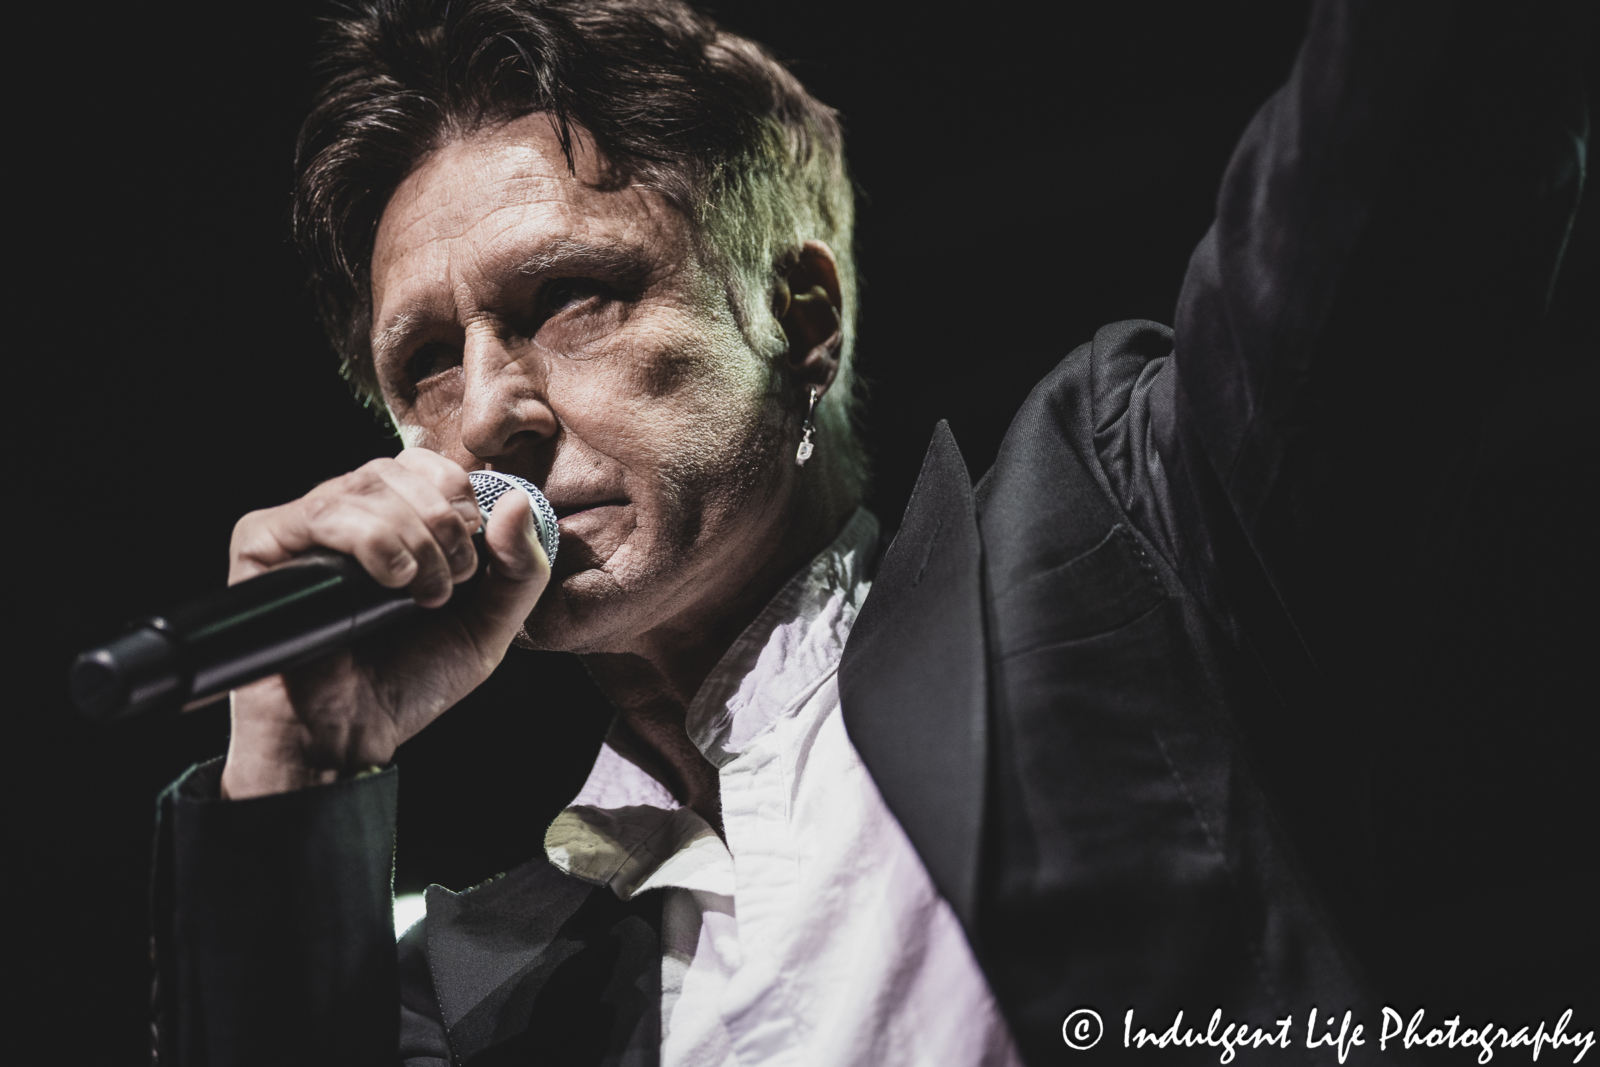 John Waite singing his solo tune "Tears" during his "Missing You" 40th Anniversary concert at Star Pavilion inside of Ameristar Casino in Kansas City, MO on December 8, 2023.